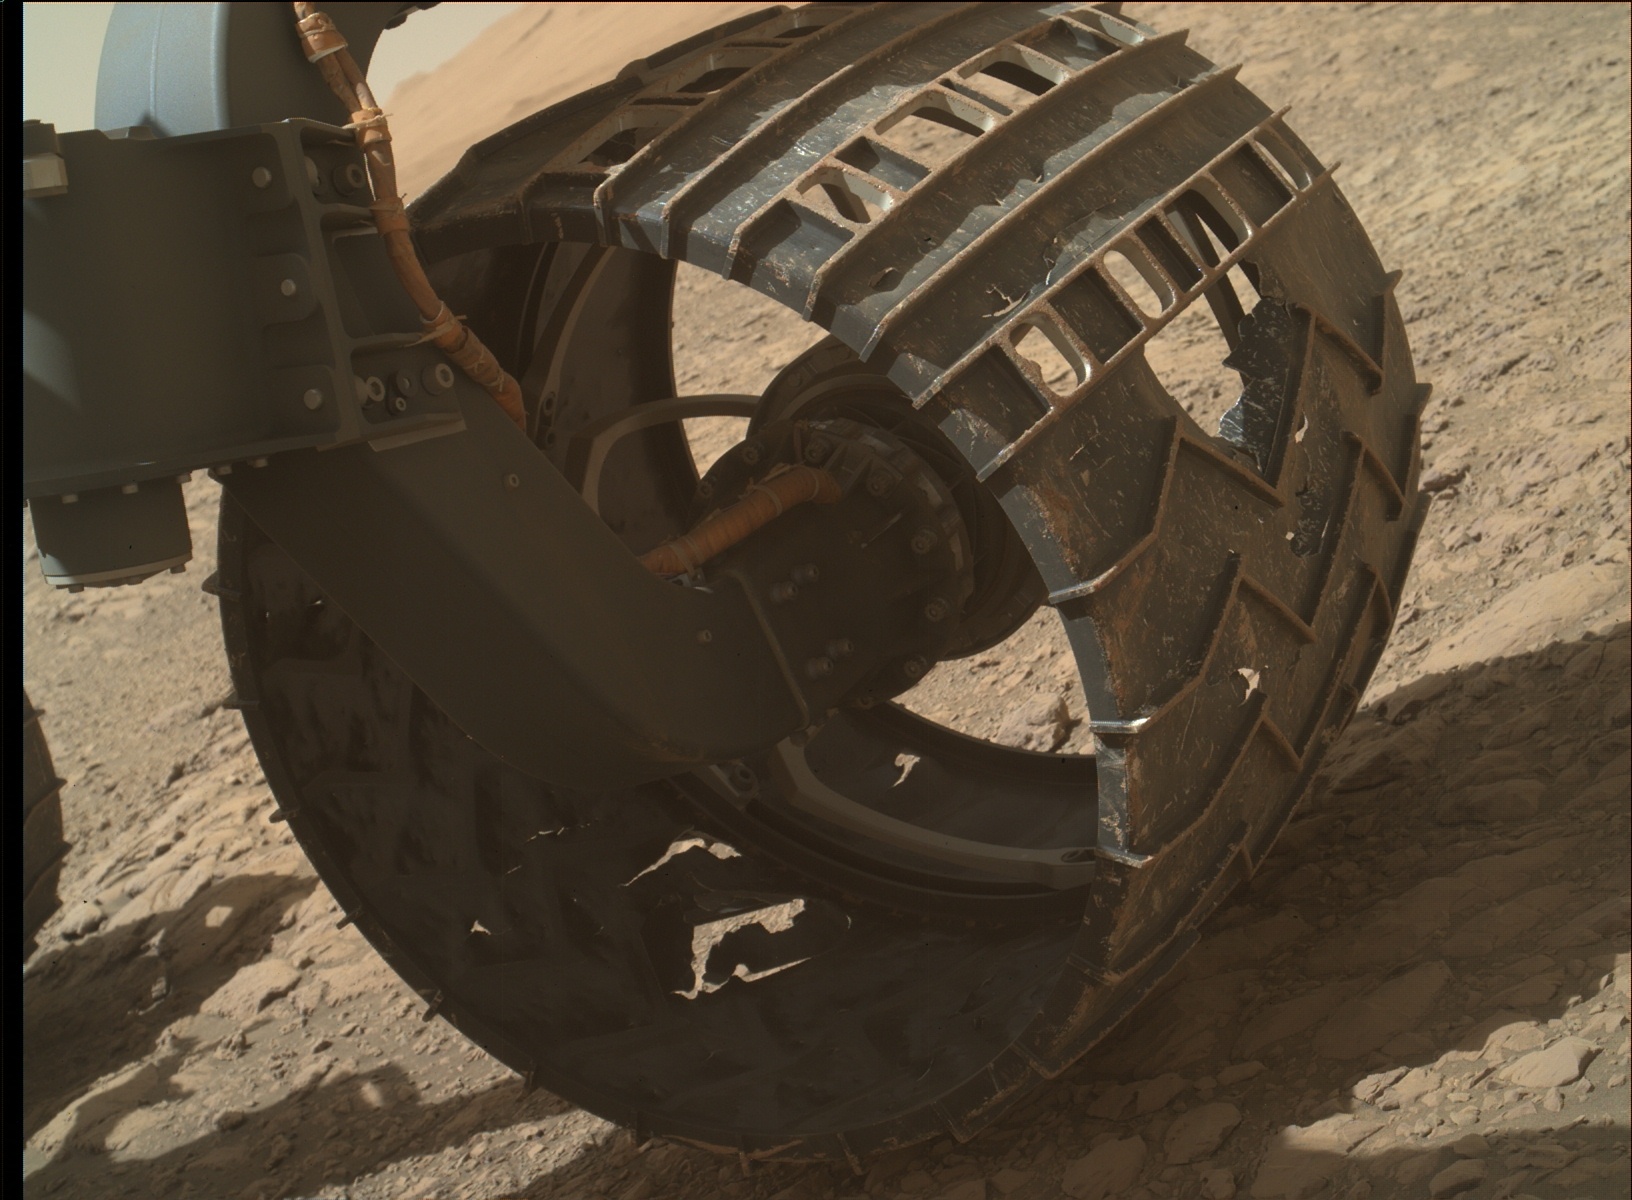 Nasa's Mars rover Curiosity acquired this image using its Mars Hand Lens Imager (MAHLI) on Sol 1887